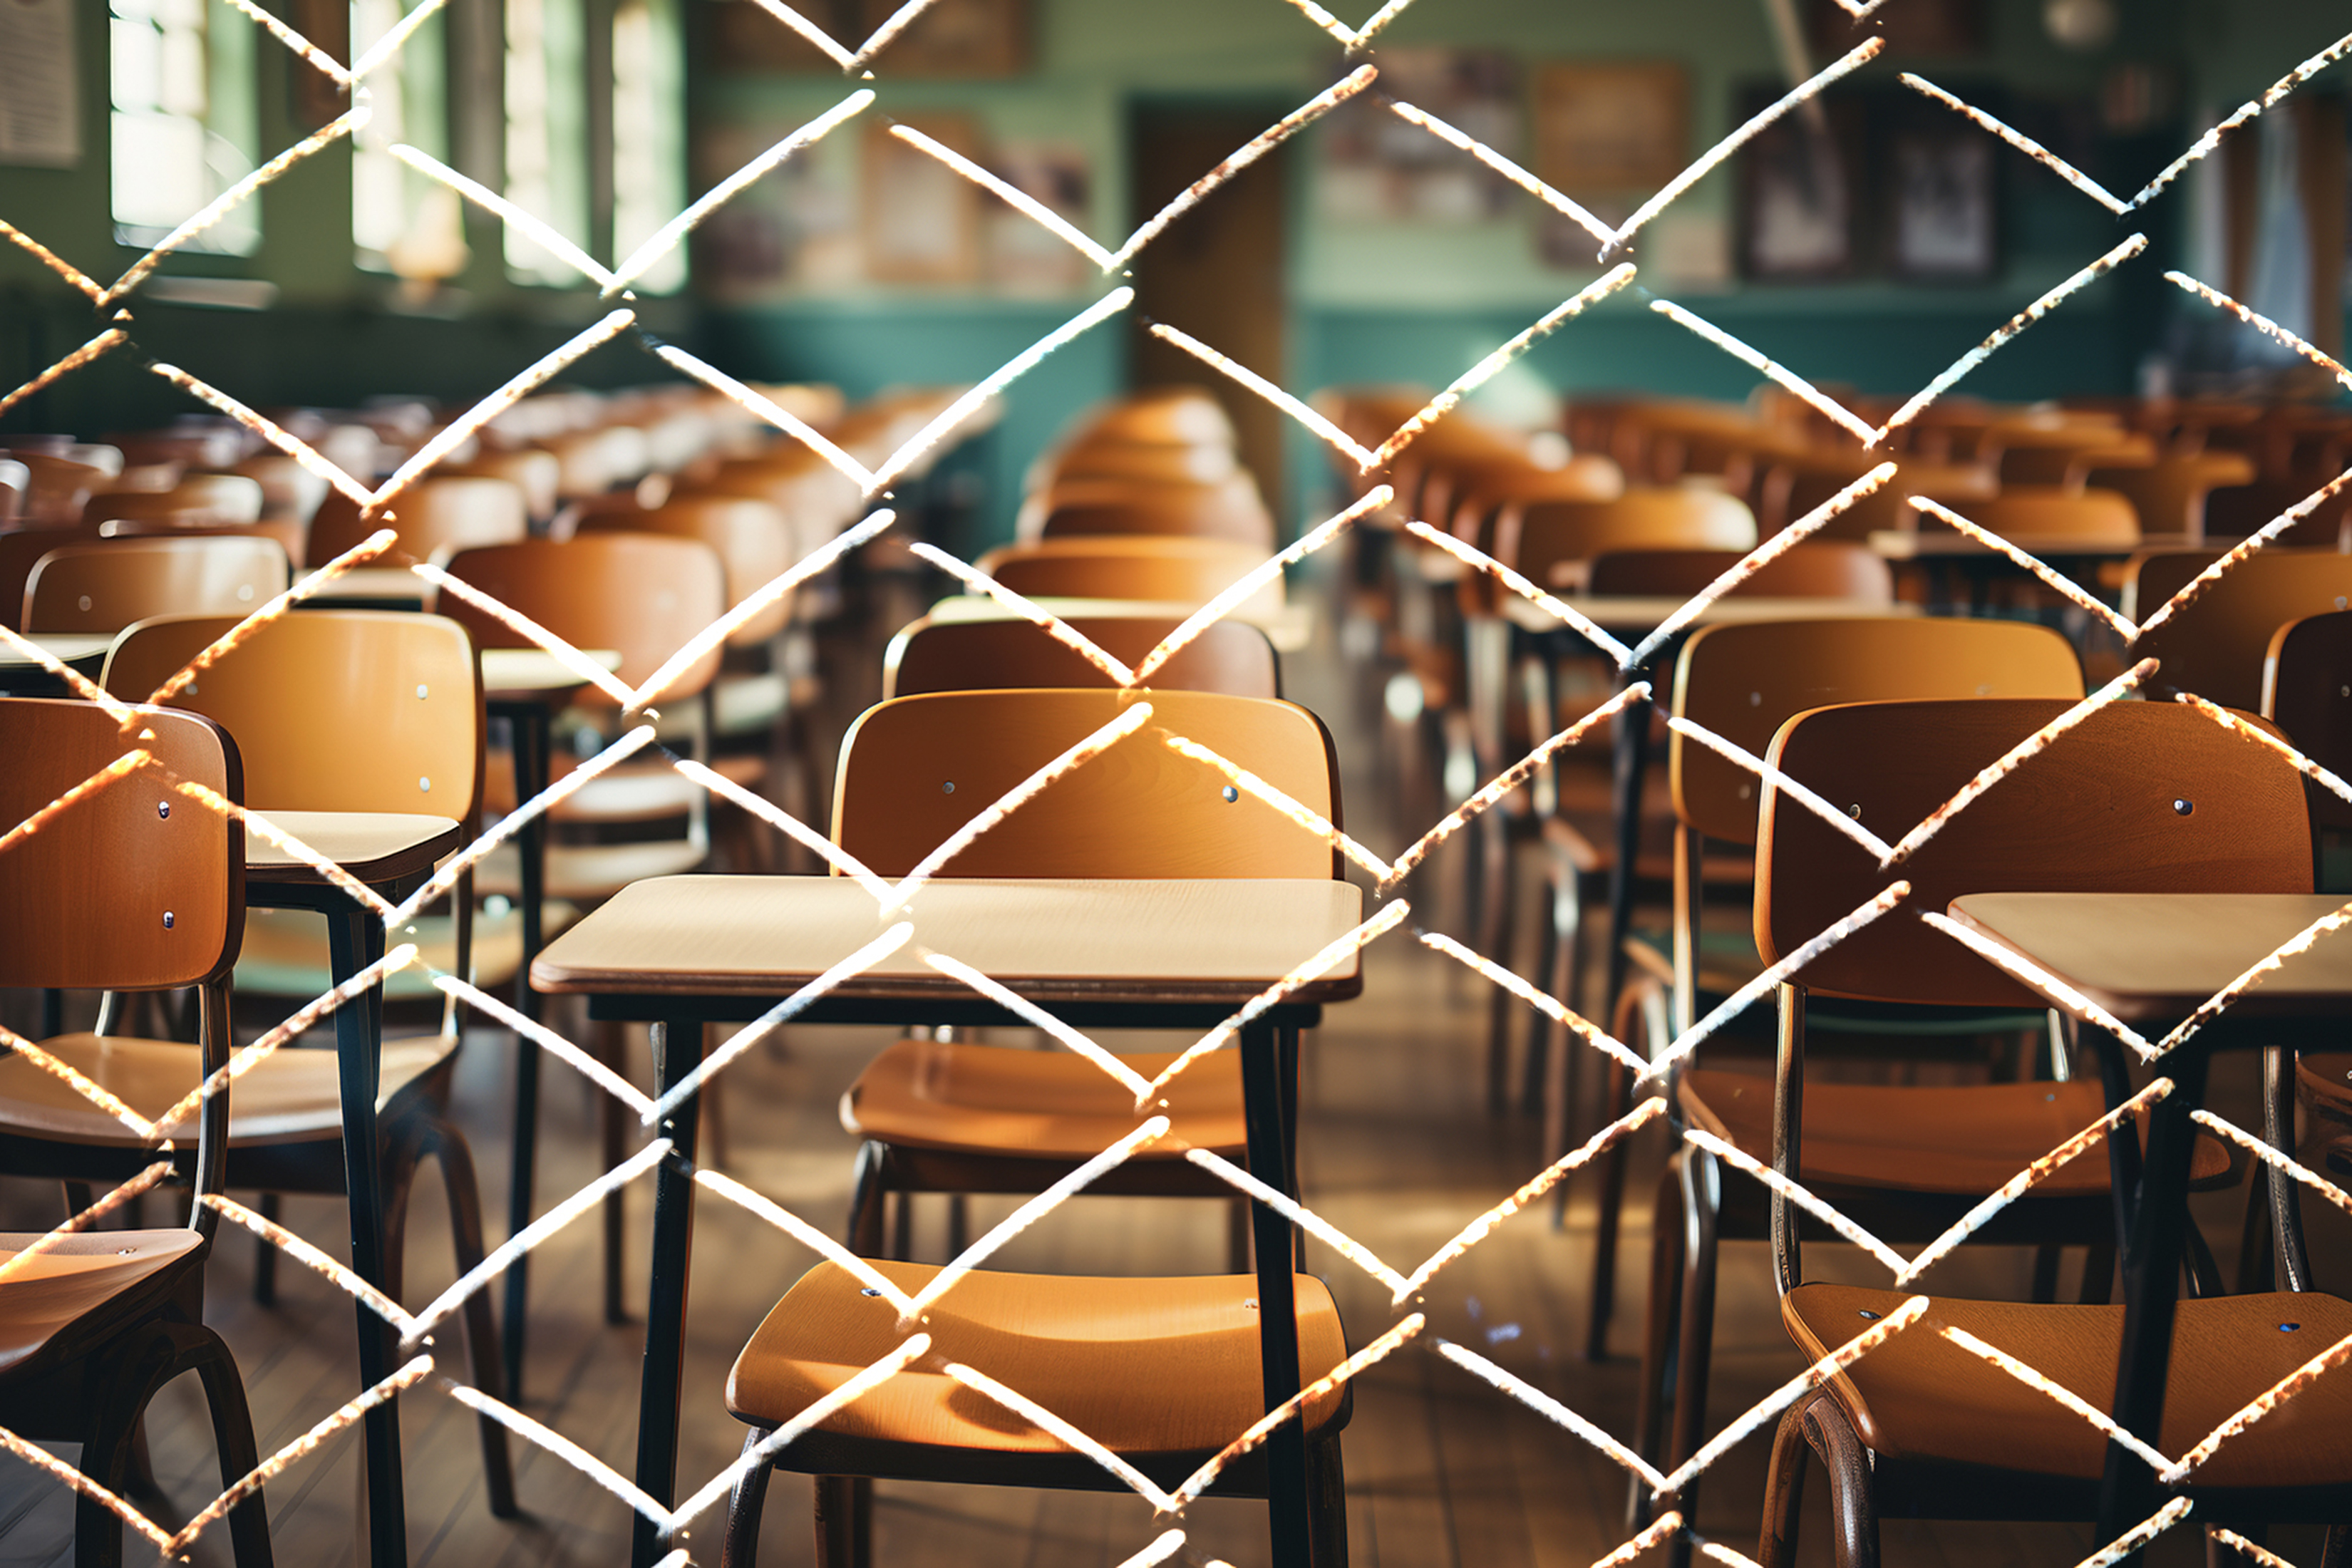 A photo illustration shows rows of wooden school desks apparently viewed through chain link fencing.